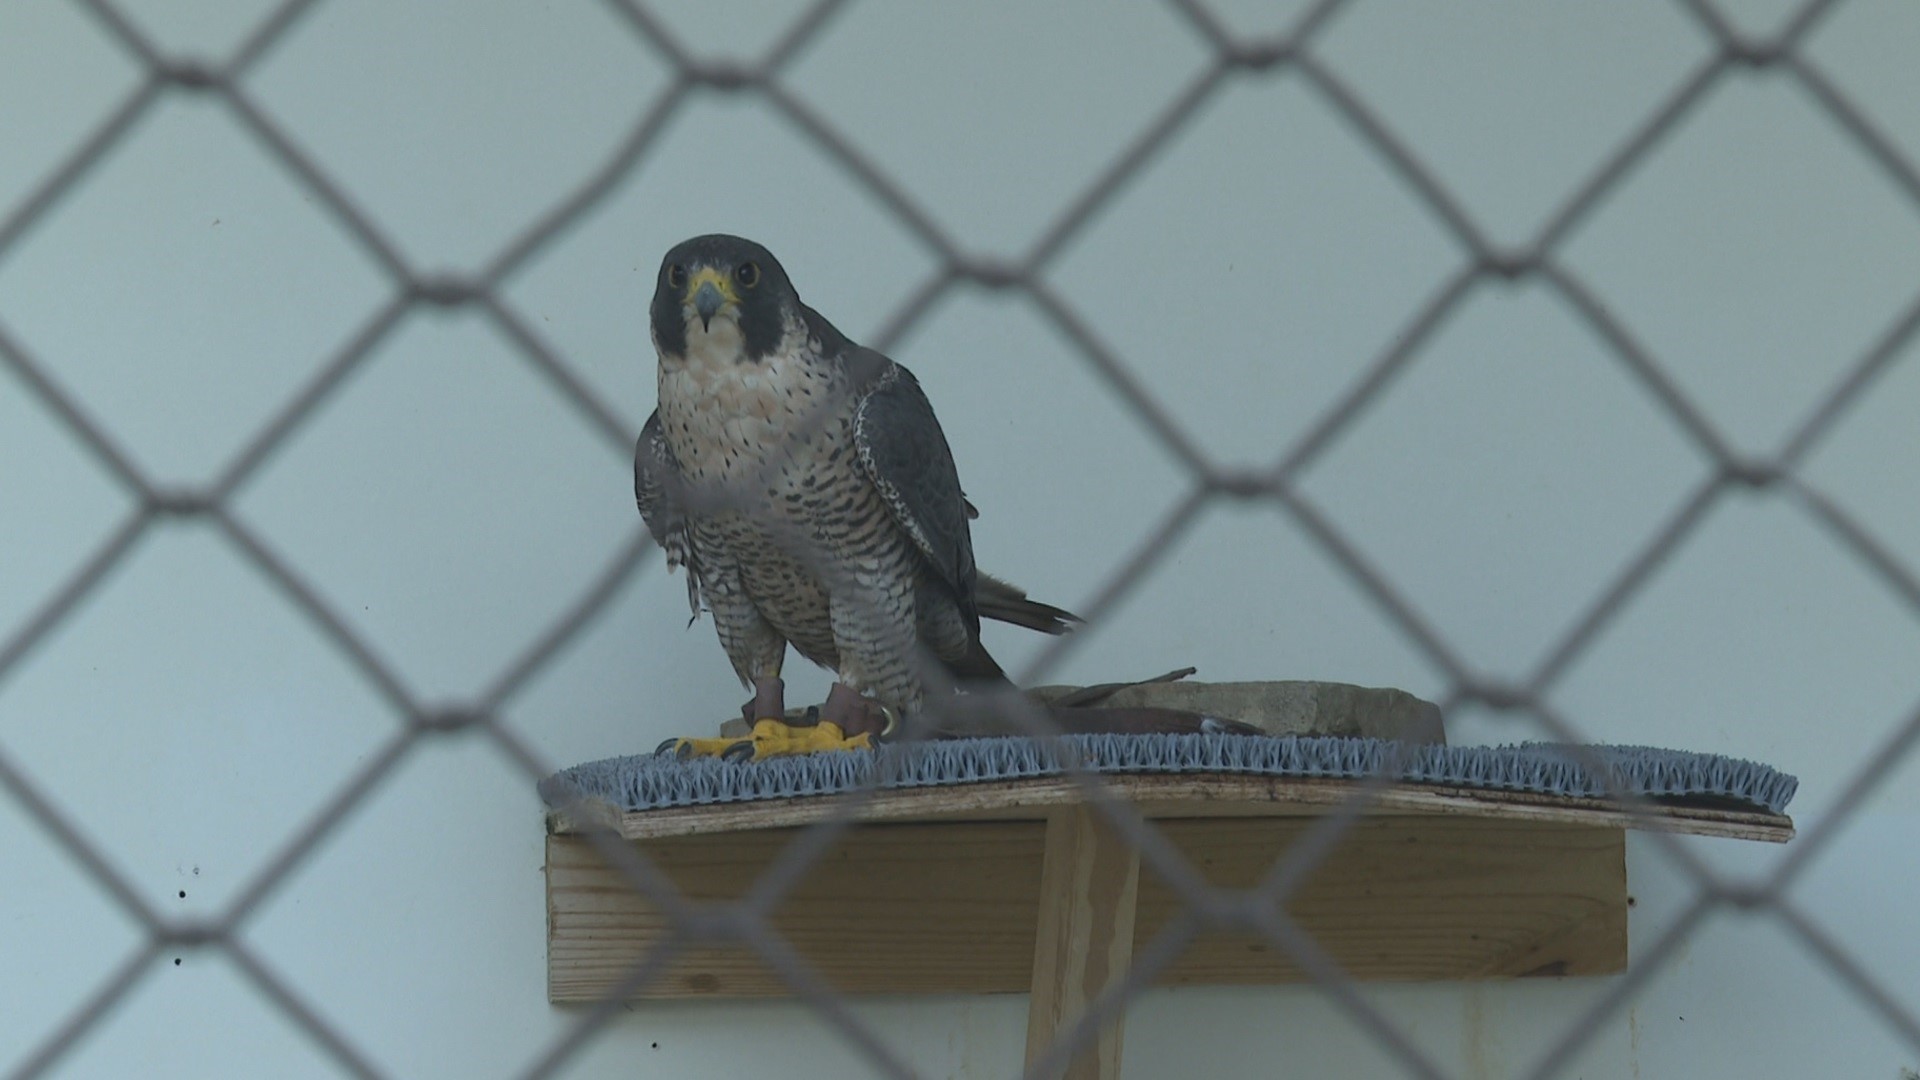 Since July 1, 14 birds have come into Raptor Rehab showing signs of poisoning.